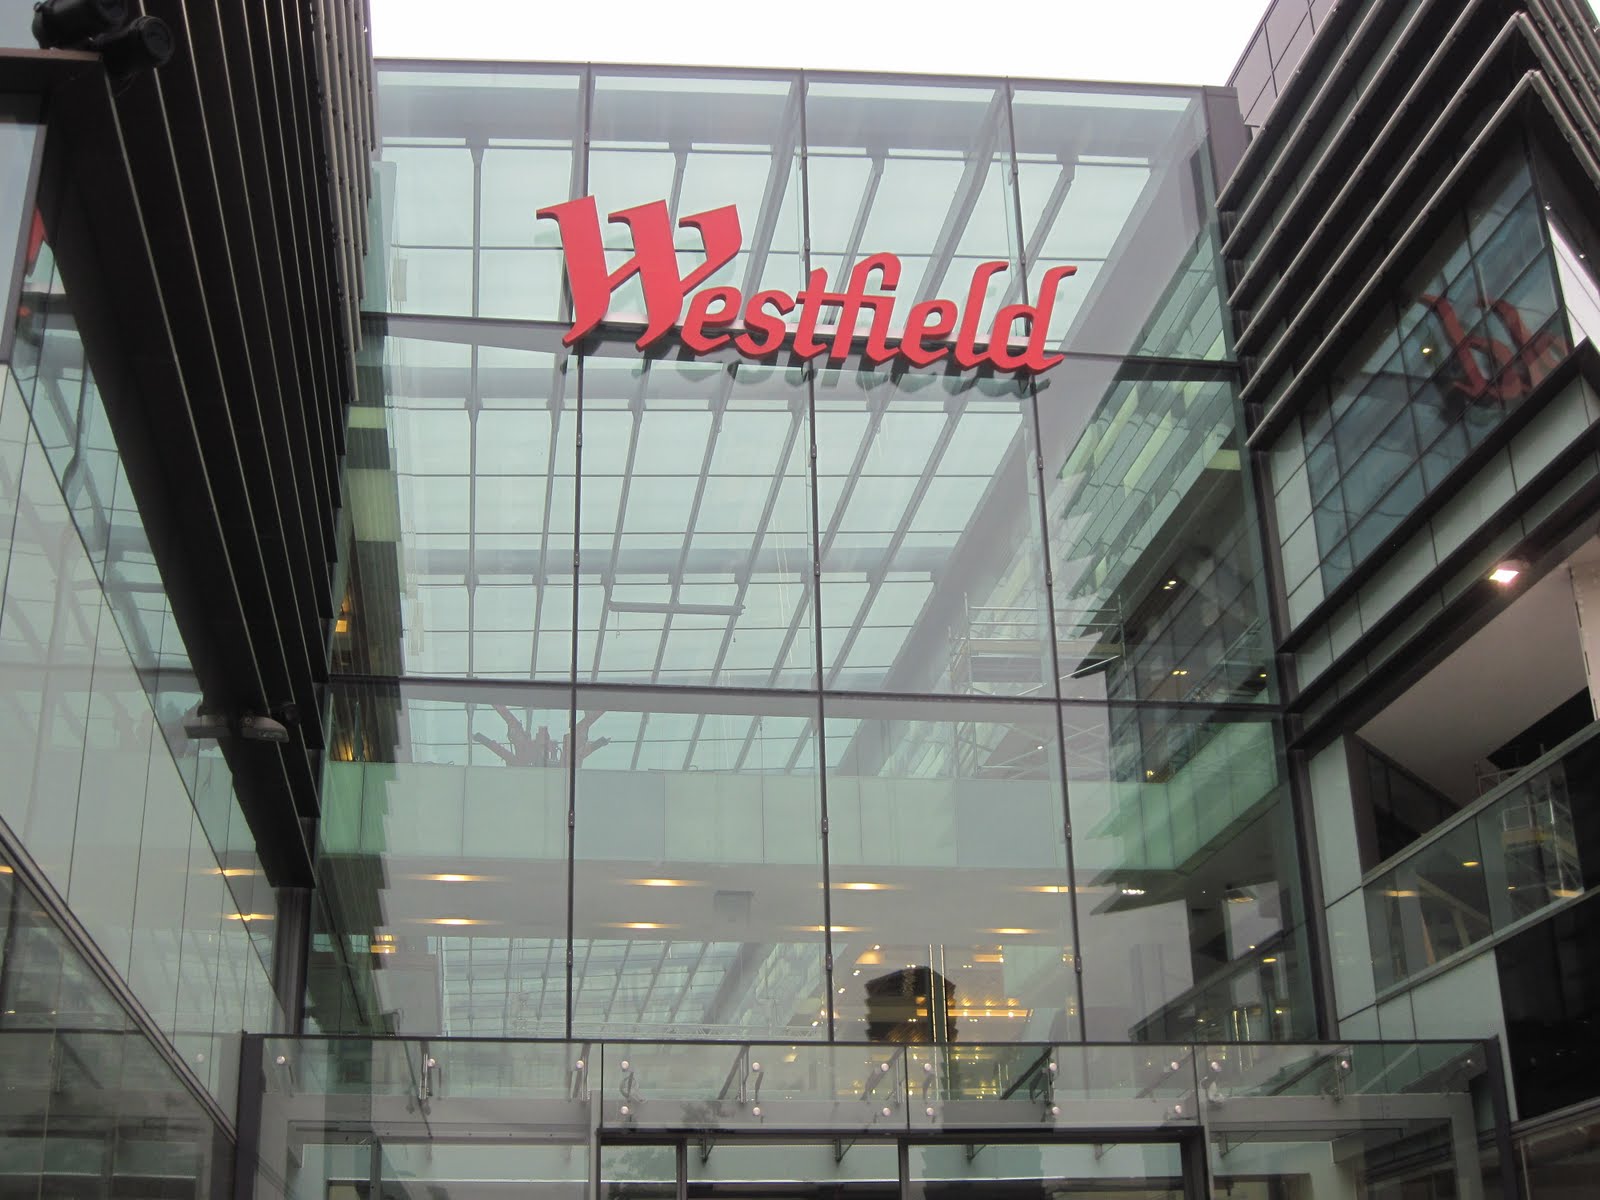 Five foot two fashionista: Behind the scenes at Westfield Stratford